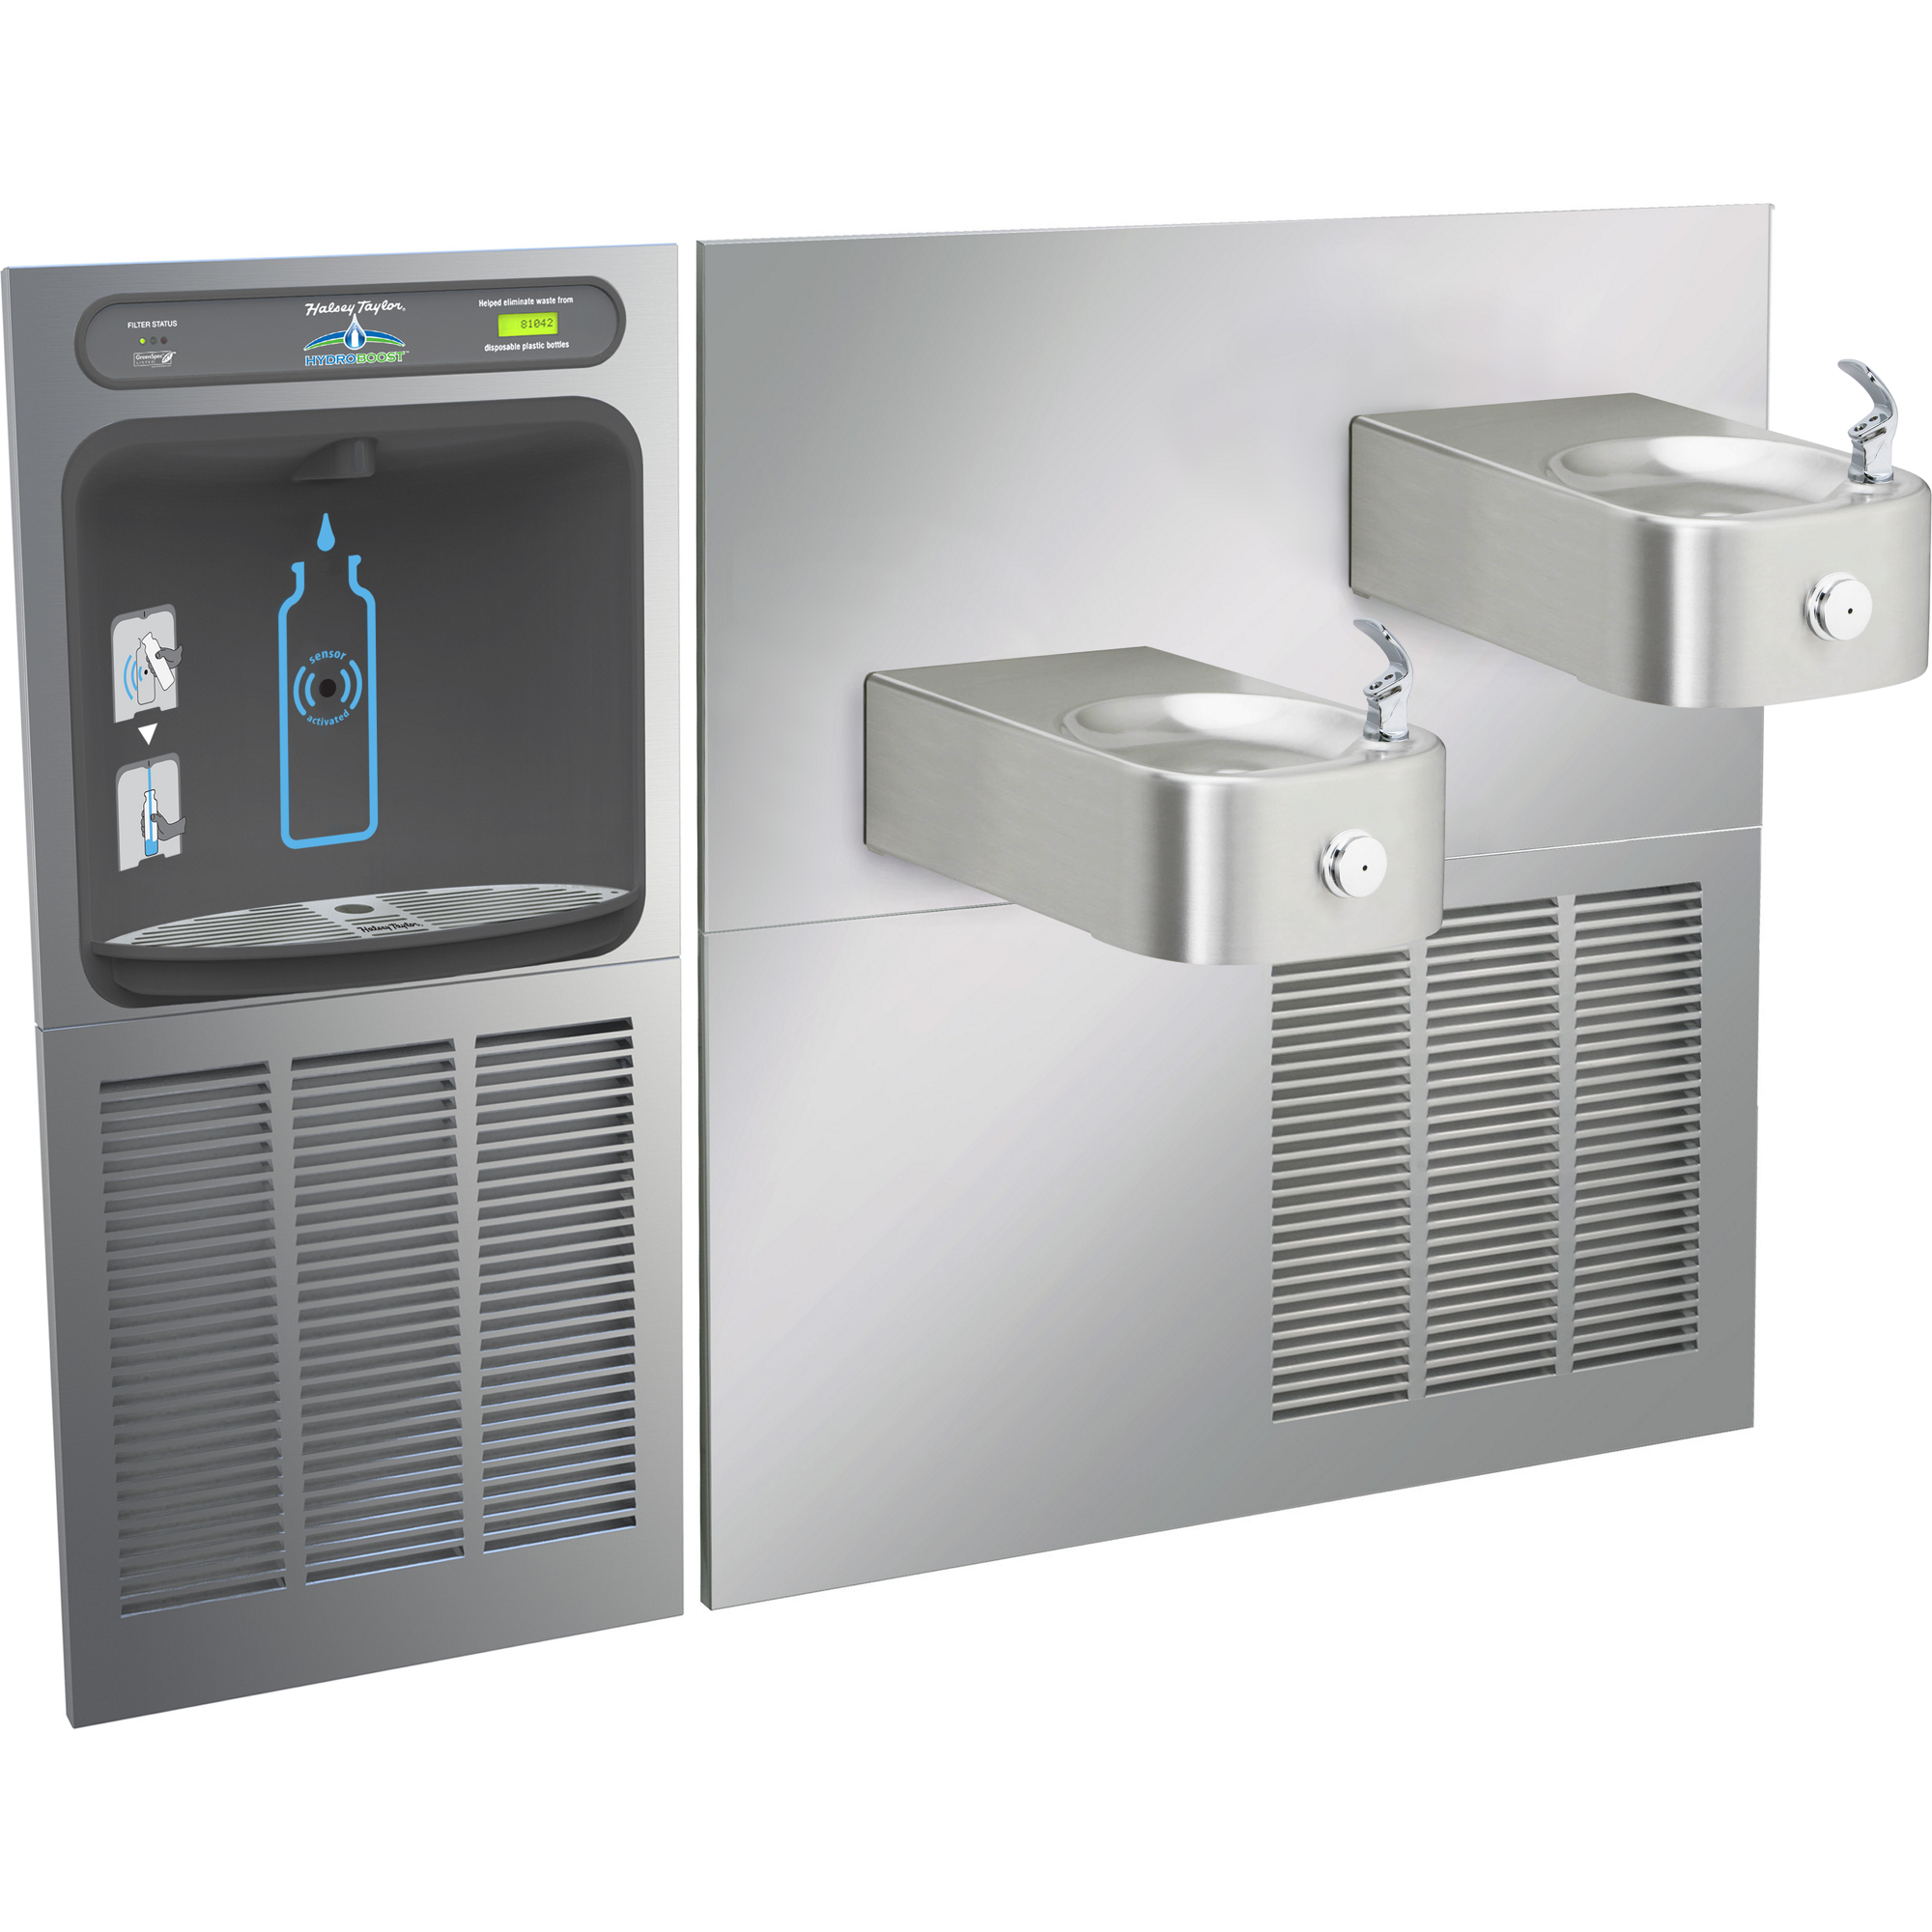 Halsey Taylor HTHBWF-HRFSER | In-wall Bi-level Bottle Filling Station | Filtered, Refrigerated, Contour drinking fountains, Stainless Steel color finish